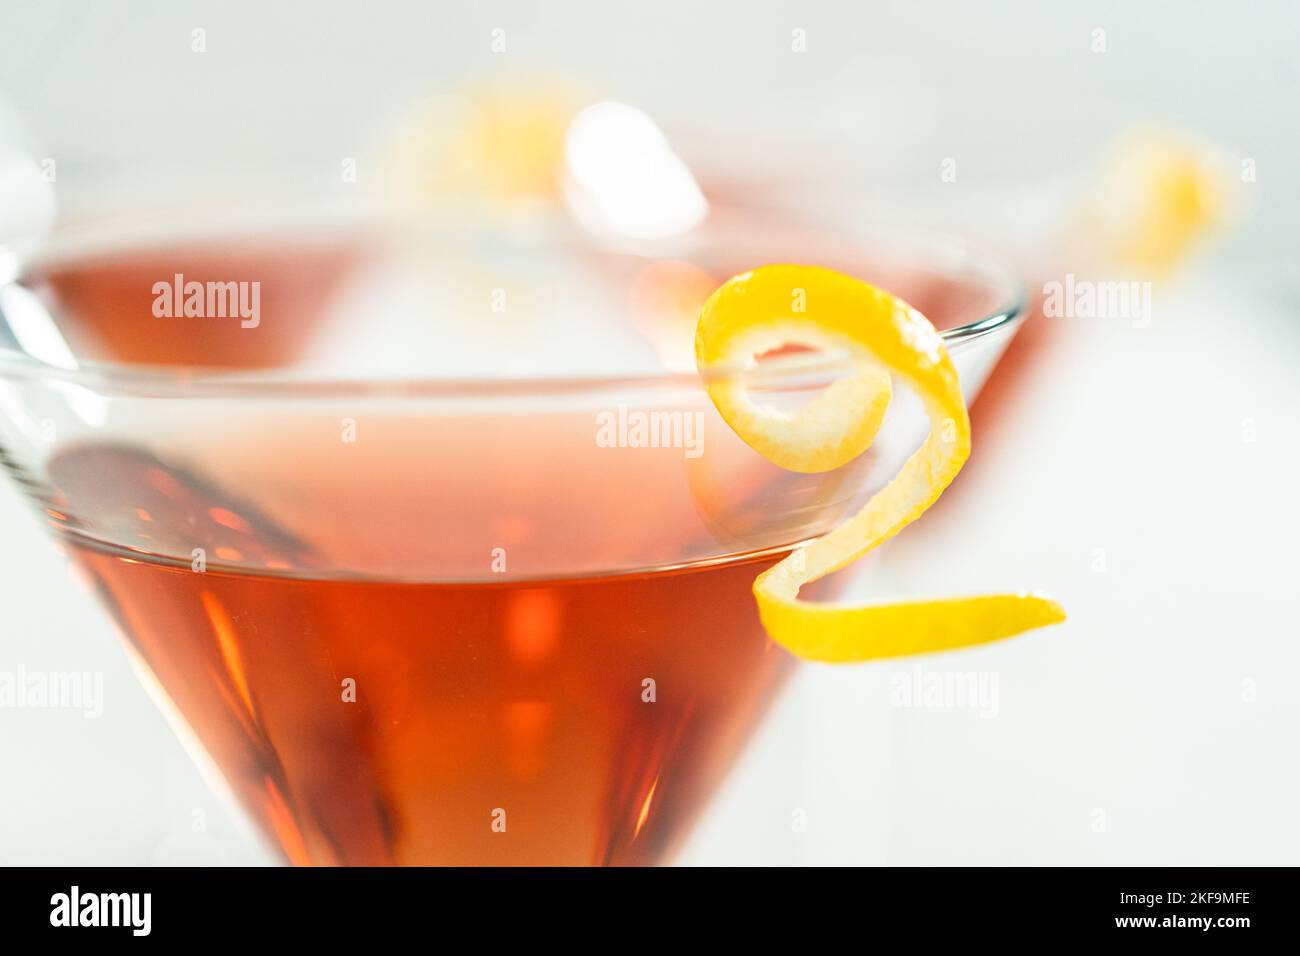 Glasses Tasty Cosmopolitan Cocktail Berries Fruits Table Bar Stock Photo by  ©serezniy 506506534